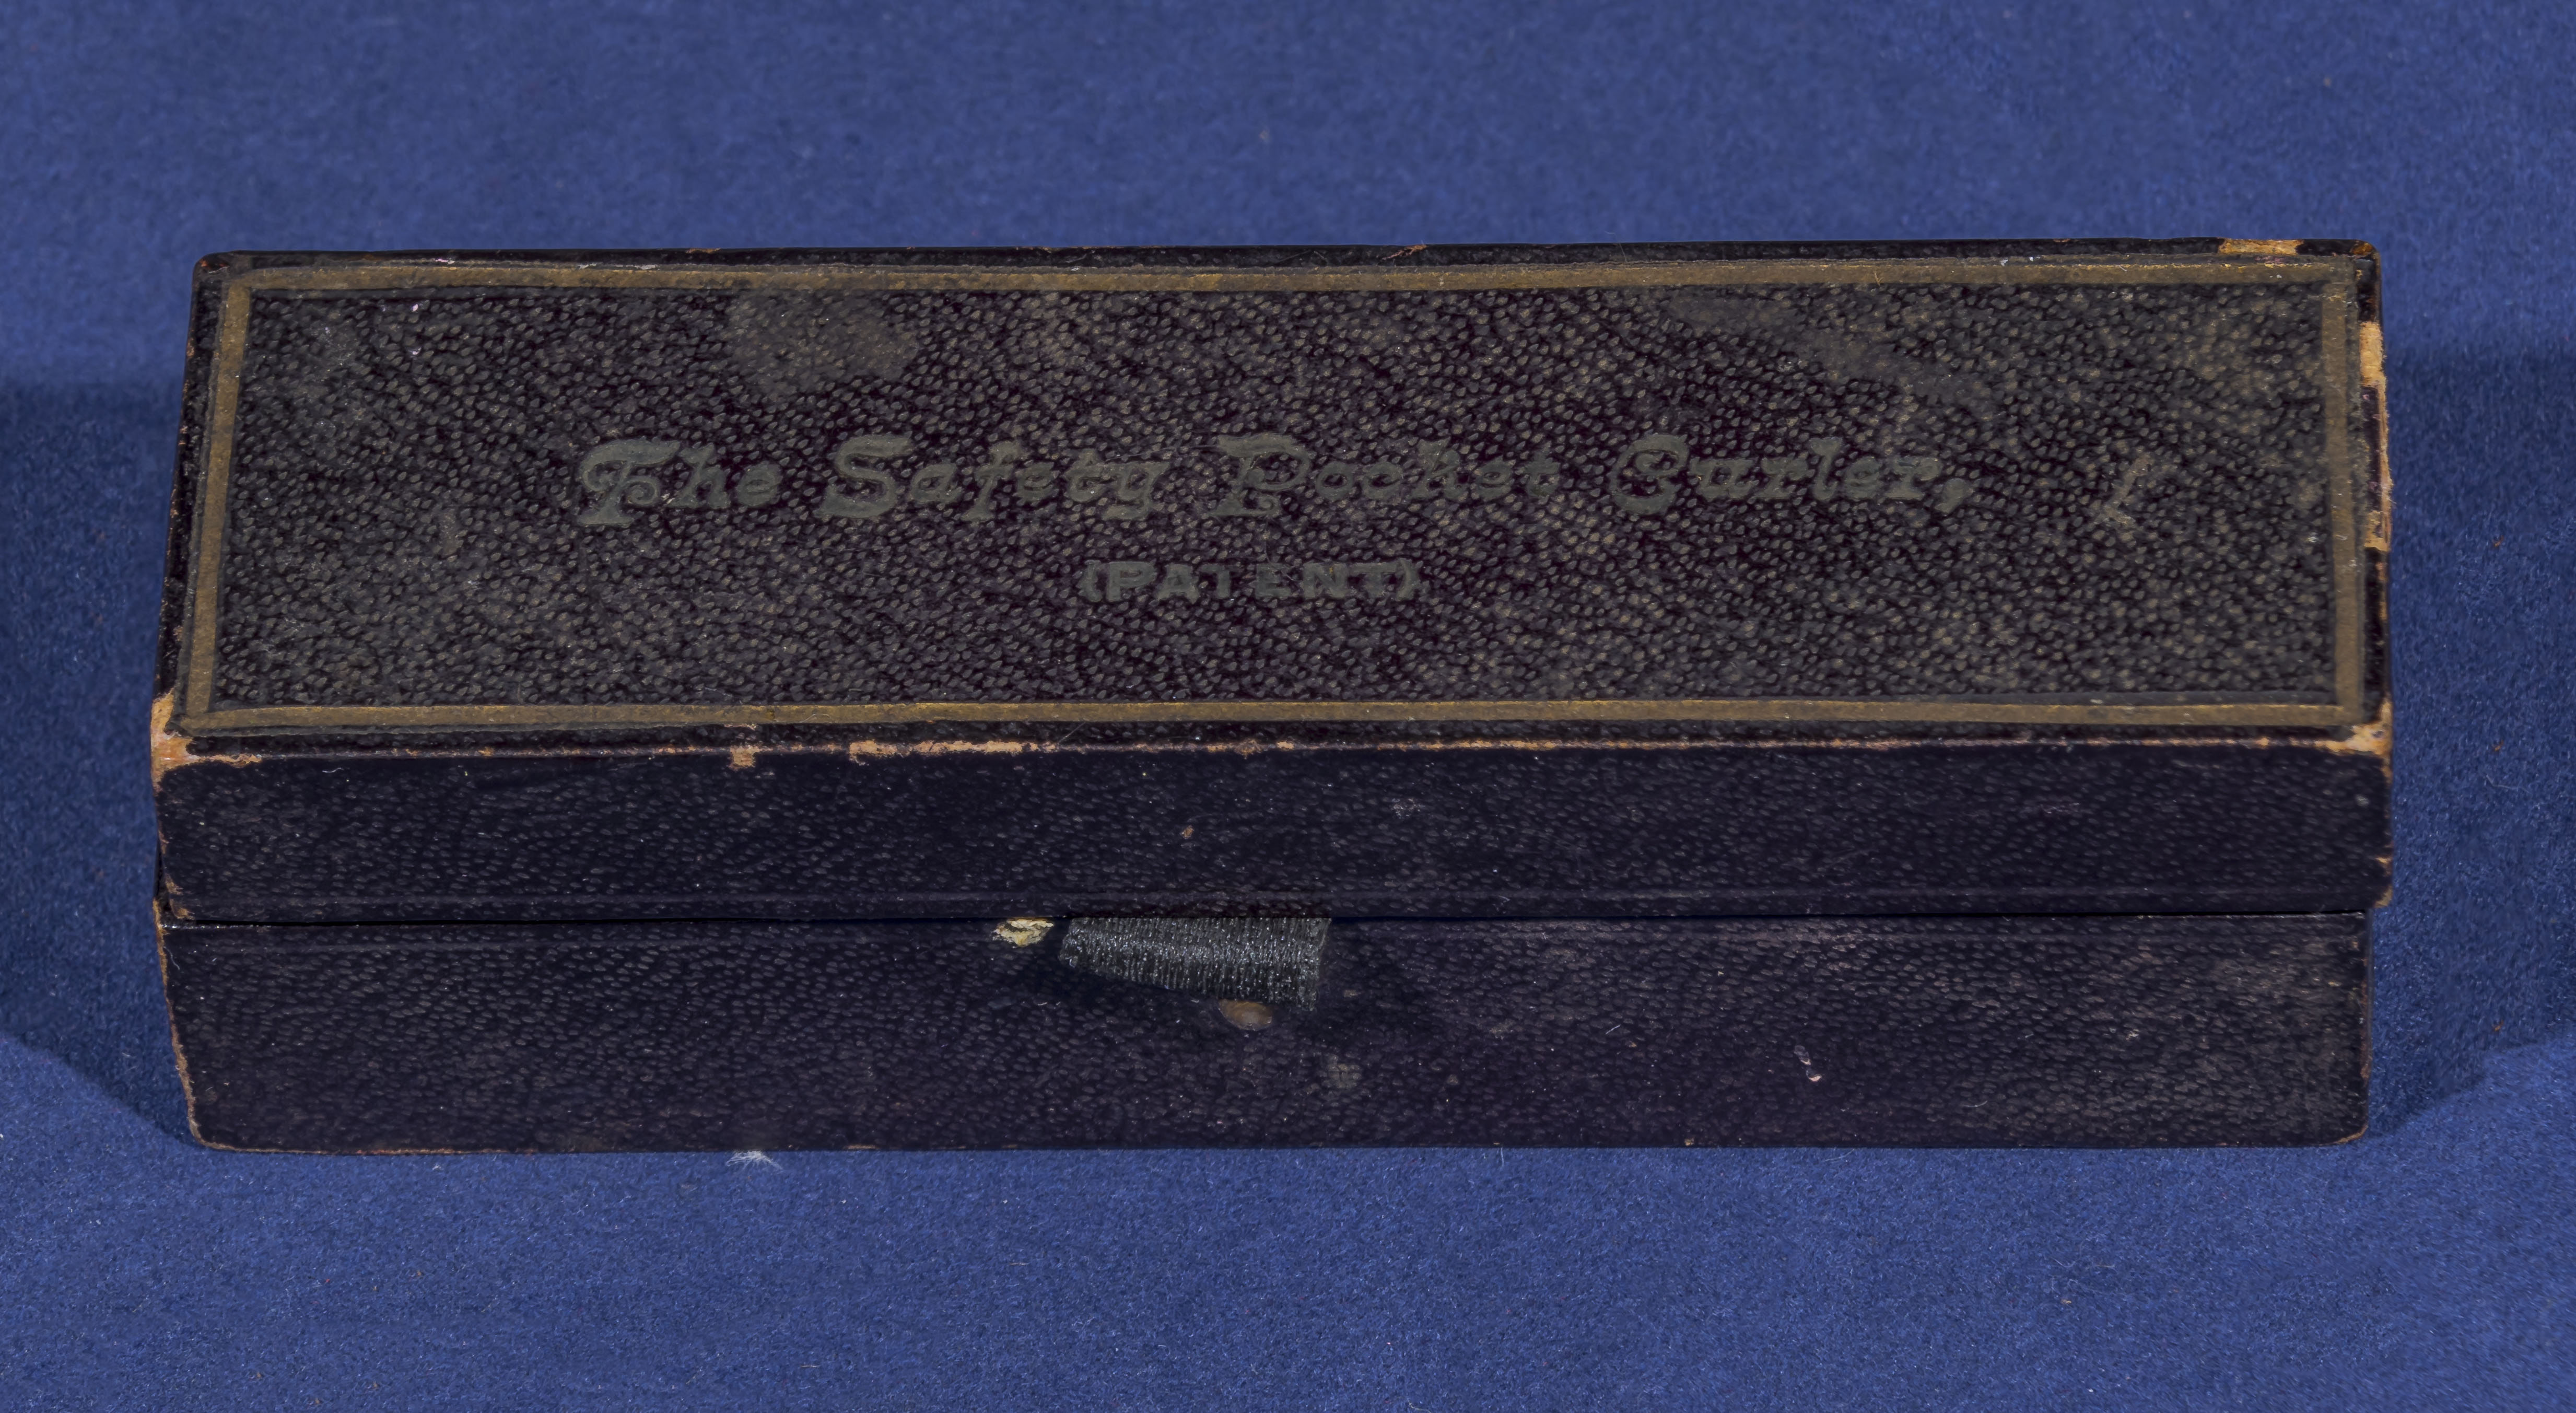 Rare unusual safety pocket curler, patent housed in a leather travelling case with compartment - Image 3 of 3